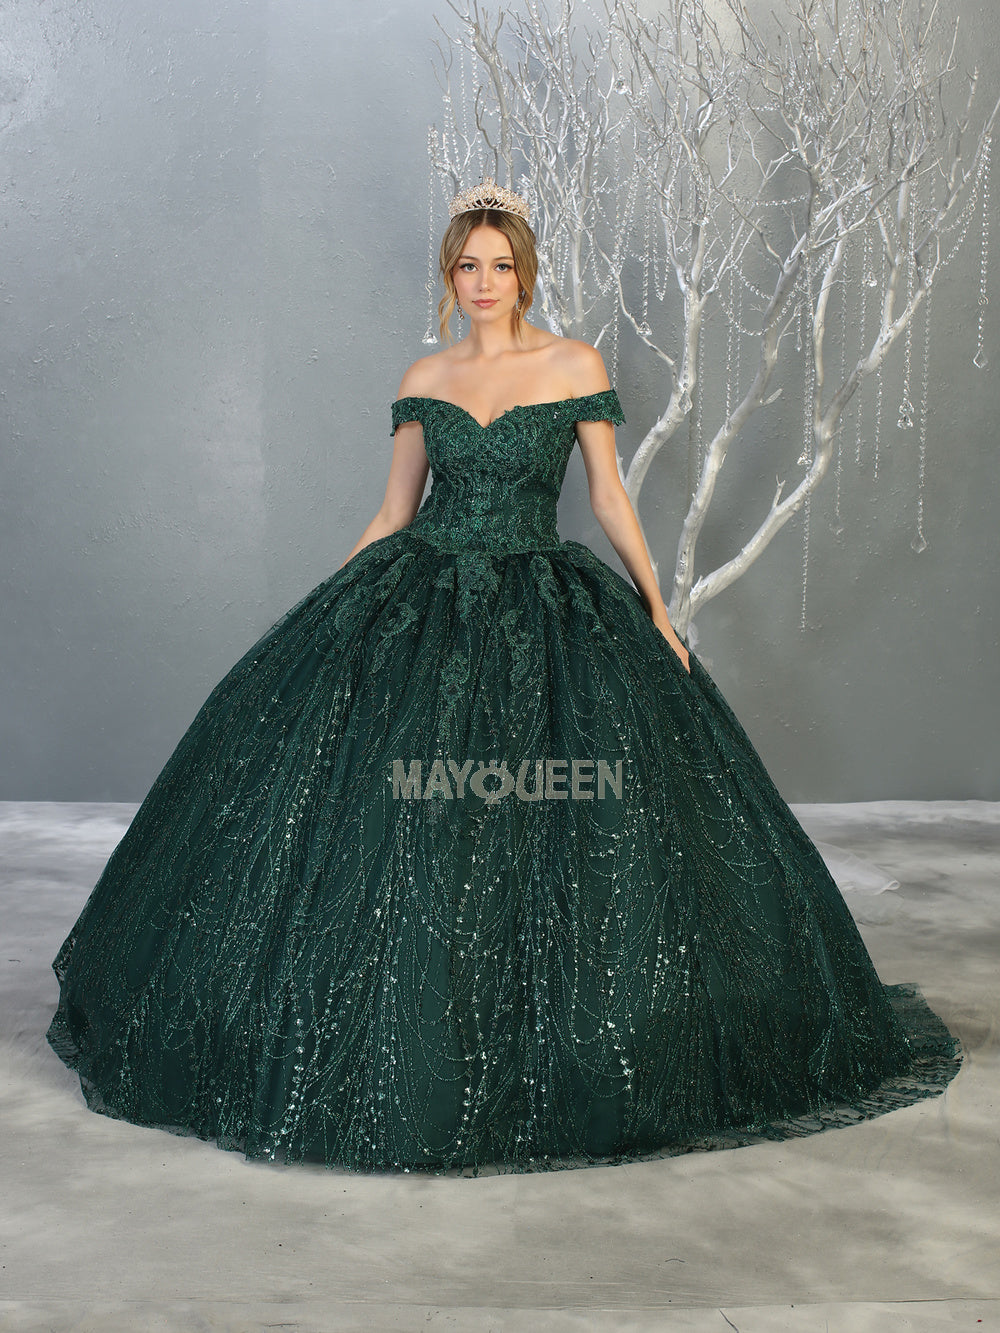 MQ LK153 - Glitter Print Off the Shoulder Quinceanera Ball Gown Embroidered Bodice & Corset Back Quinceanera Gowns Mayqueen 4 HUNTER GREEN 